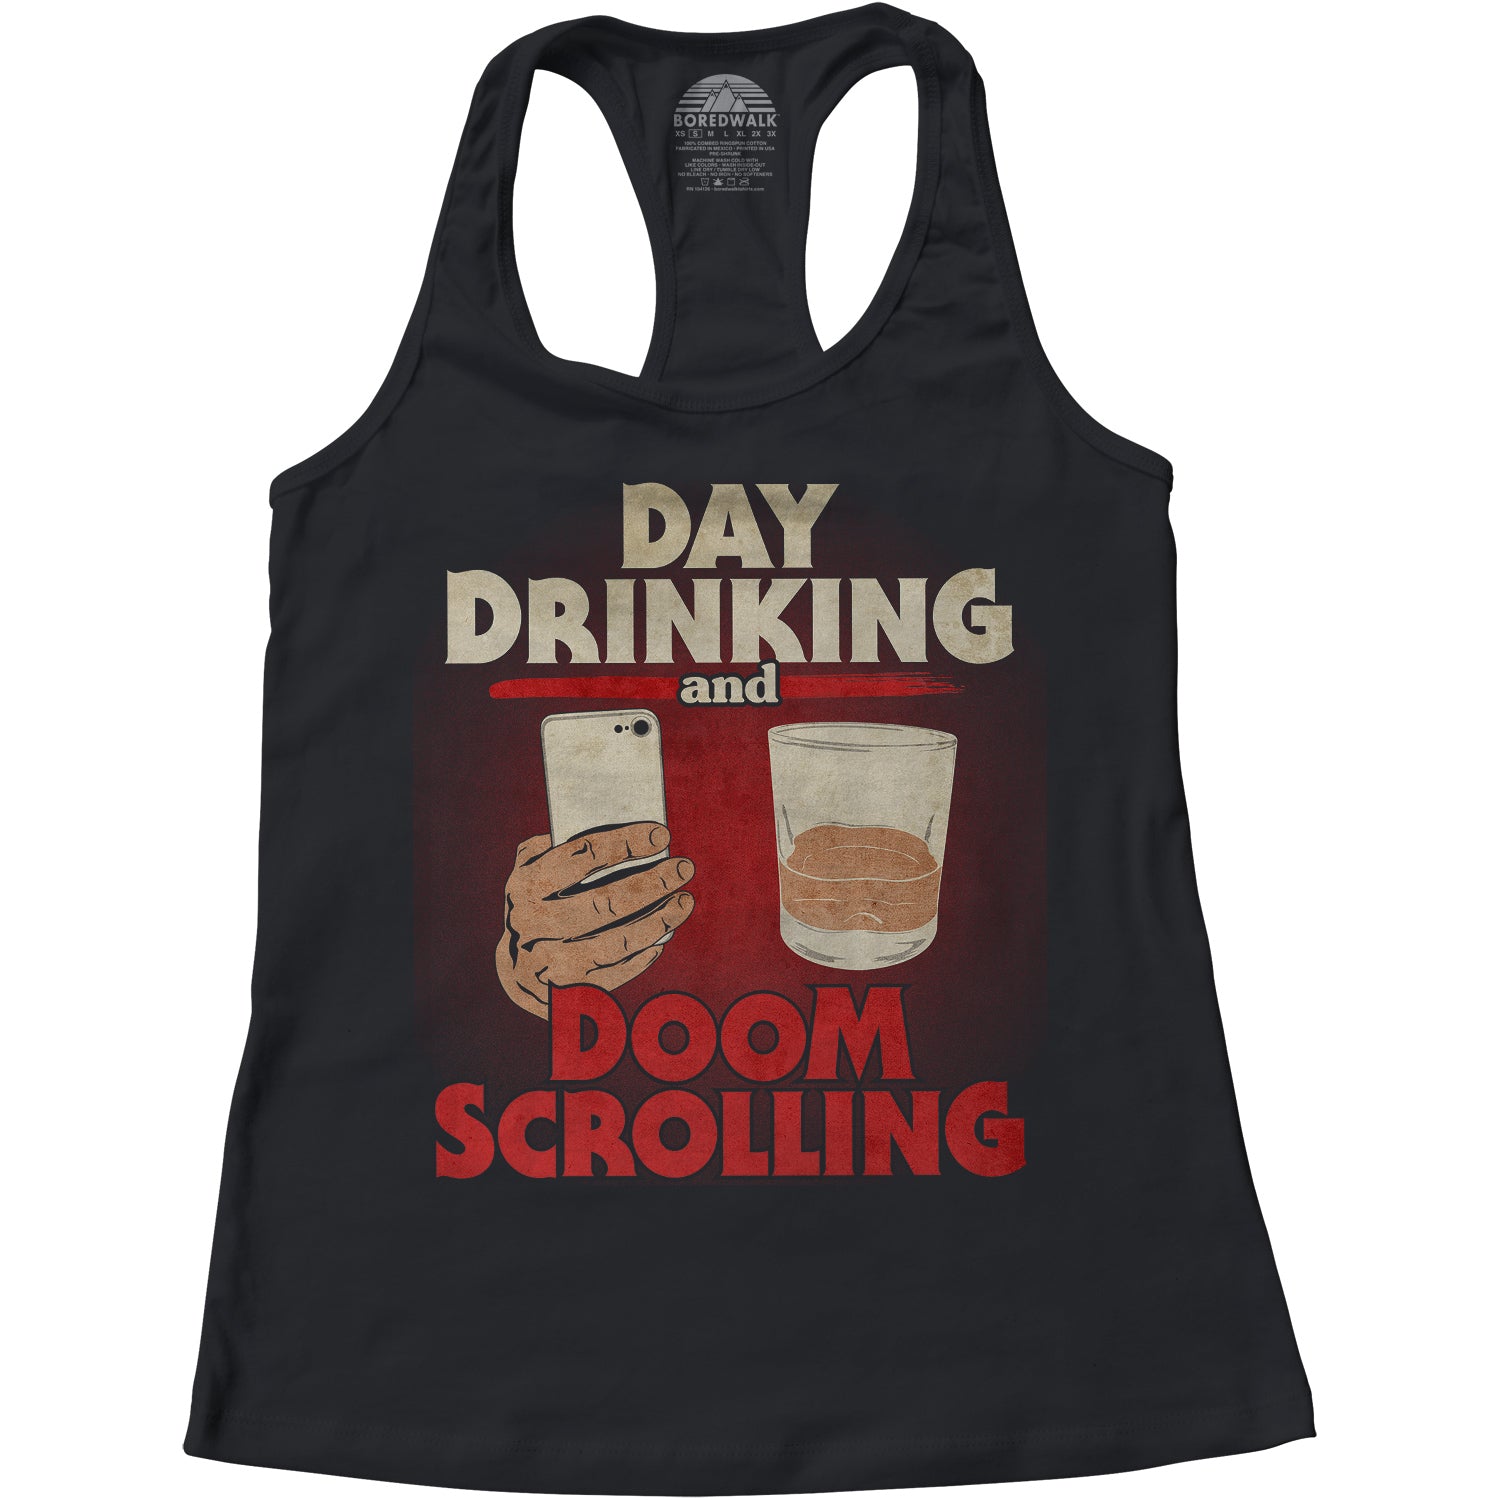 Women's Day Drinking and Doom Scrolling Racerback Tank Top